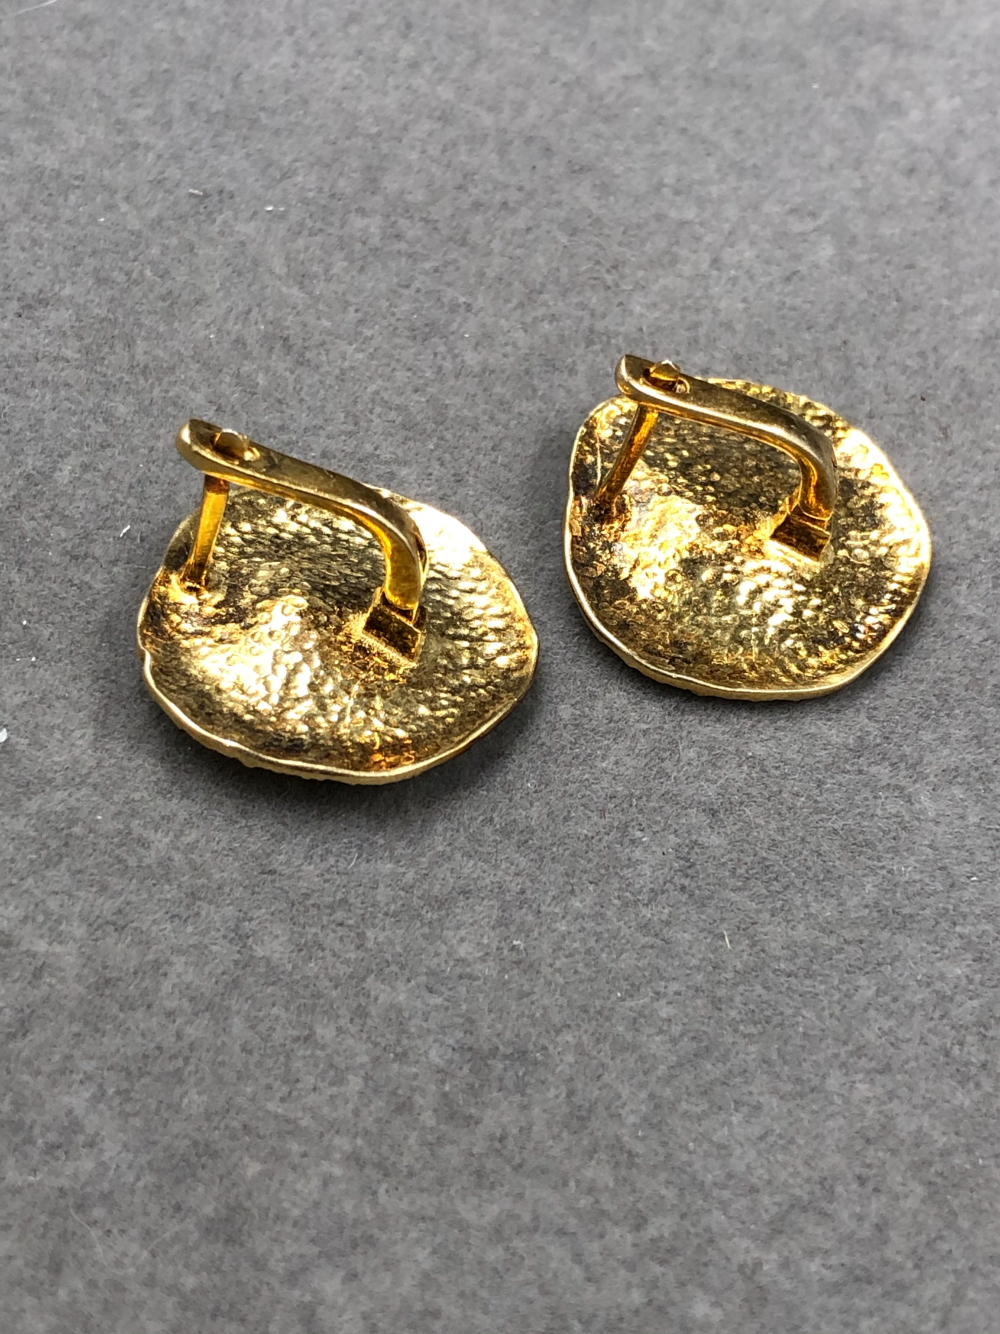 A PAIR OF FINE SILVER GILT STONE SET SPIDER CRAWLING ON BURNISHED LEAF STUD EARRINGS. DIAMETER 2cms, - Image 2 of 5